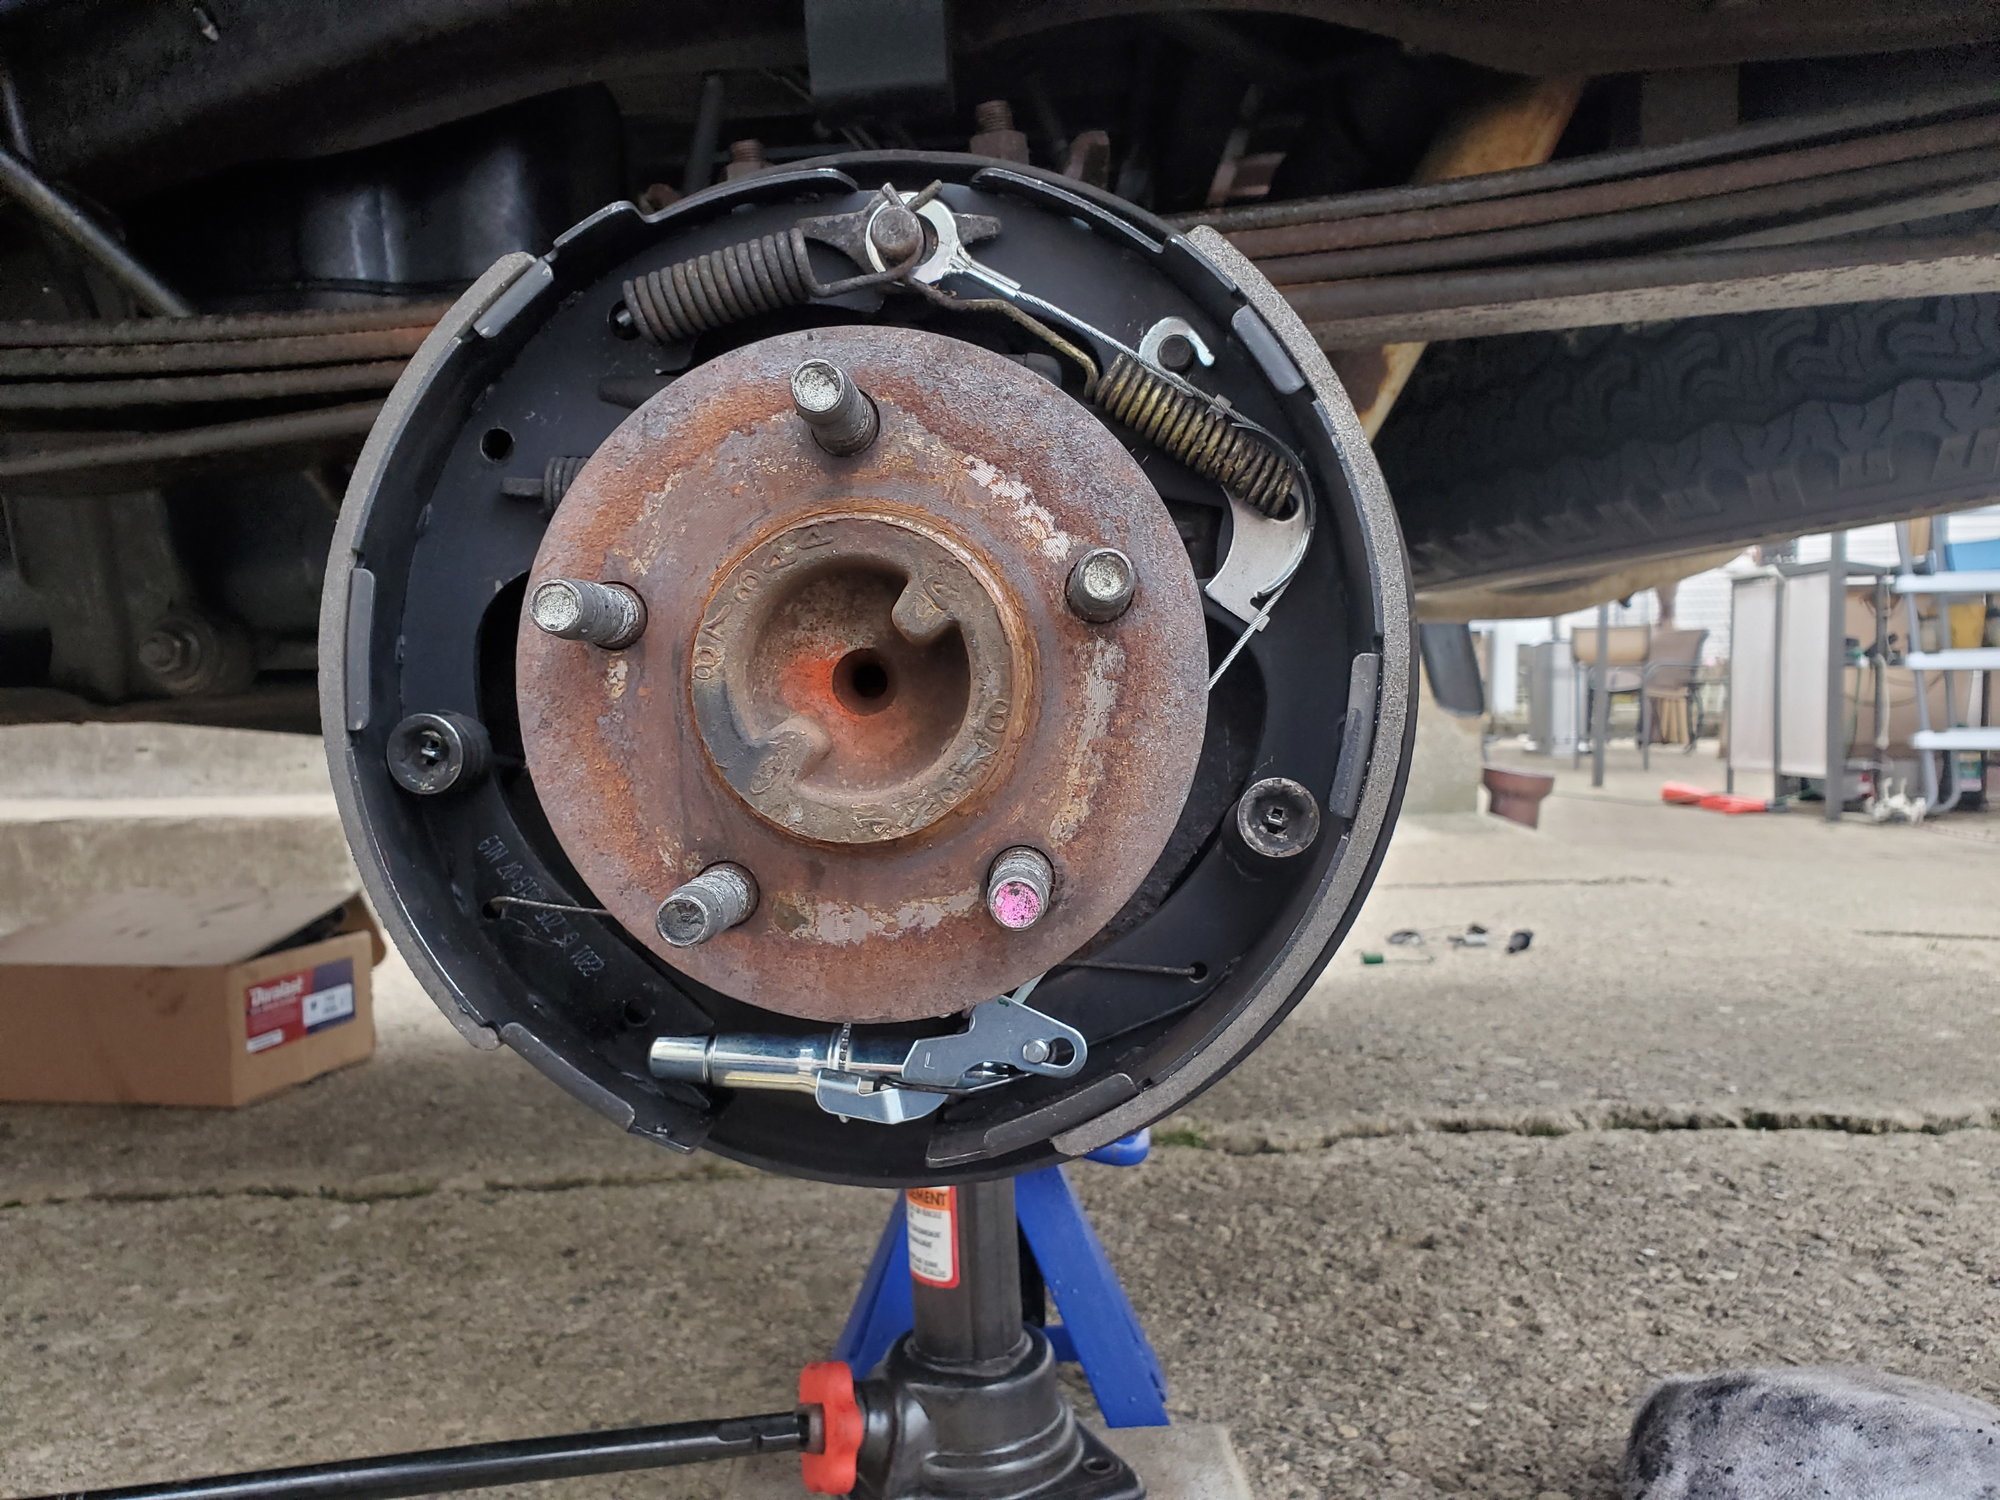 Troublesome Drum Brake - Ranger-Forums - The Ultimate Ford Ranger Resource